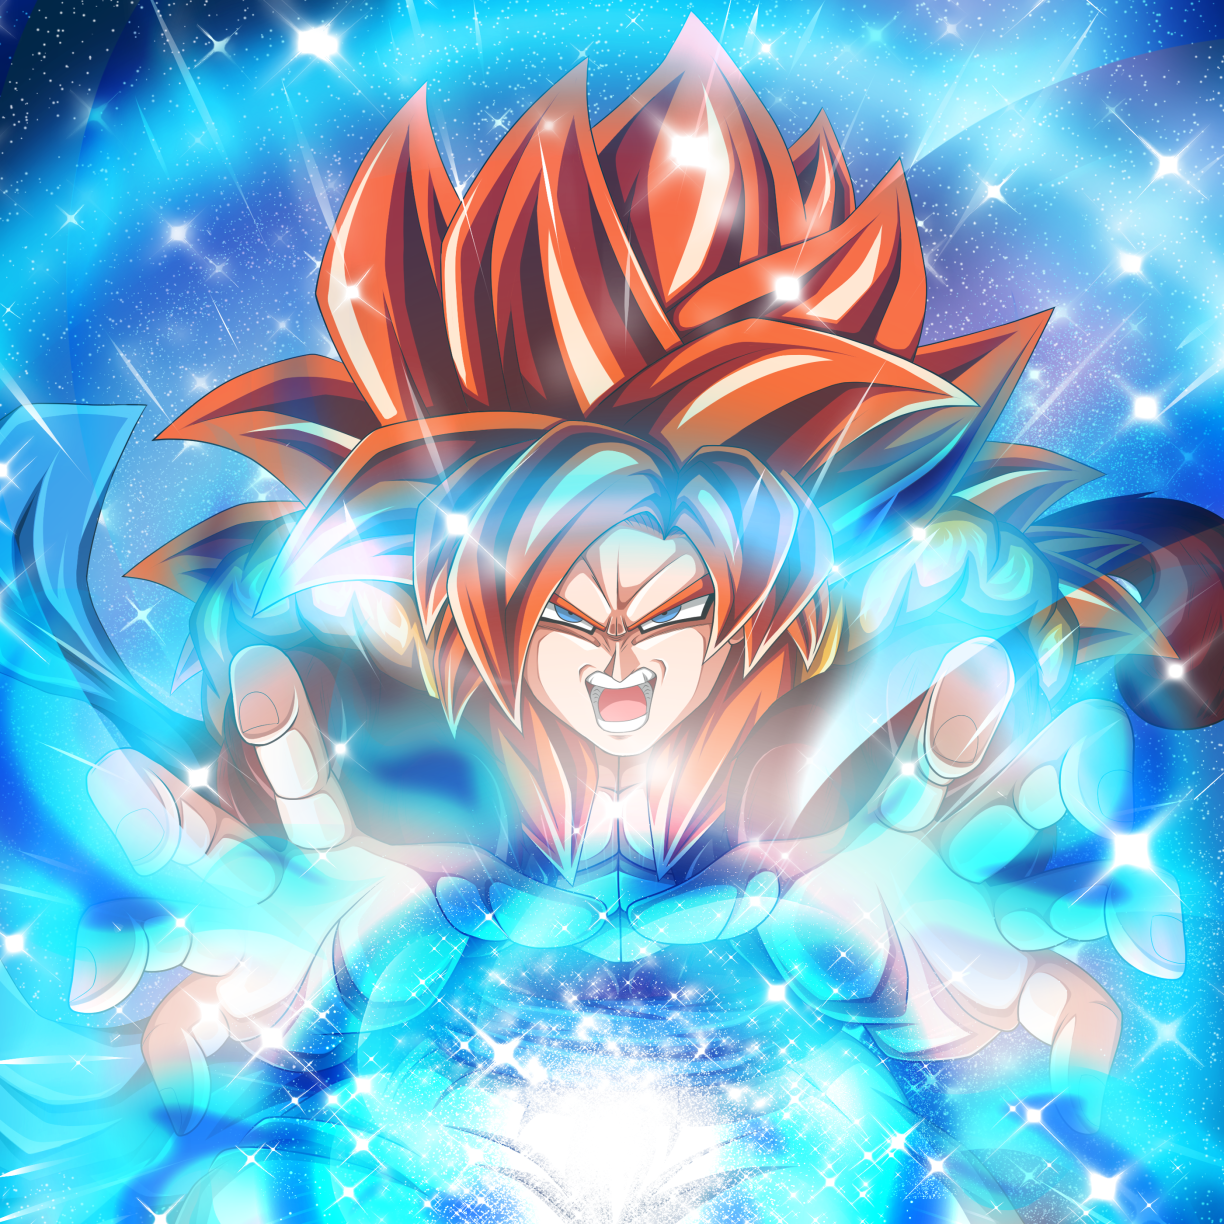 View, Download, Rate, and Comment on this Gogeta SSJ4 pfp.